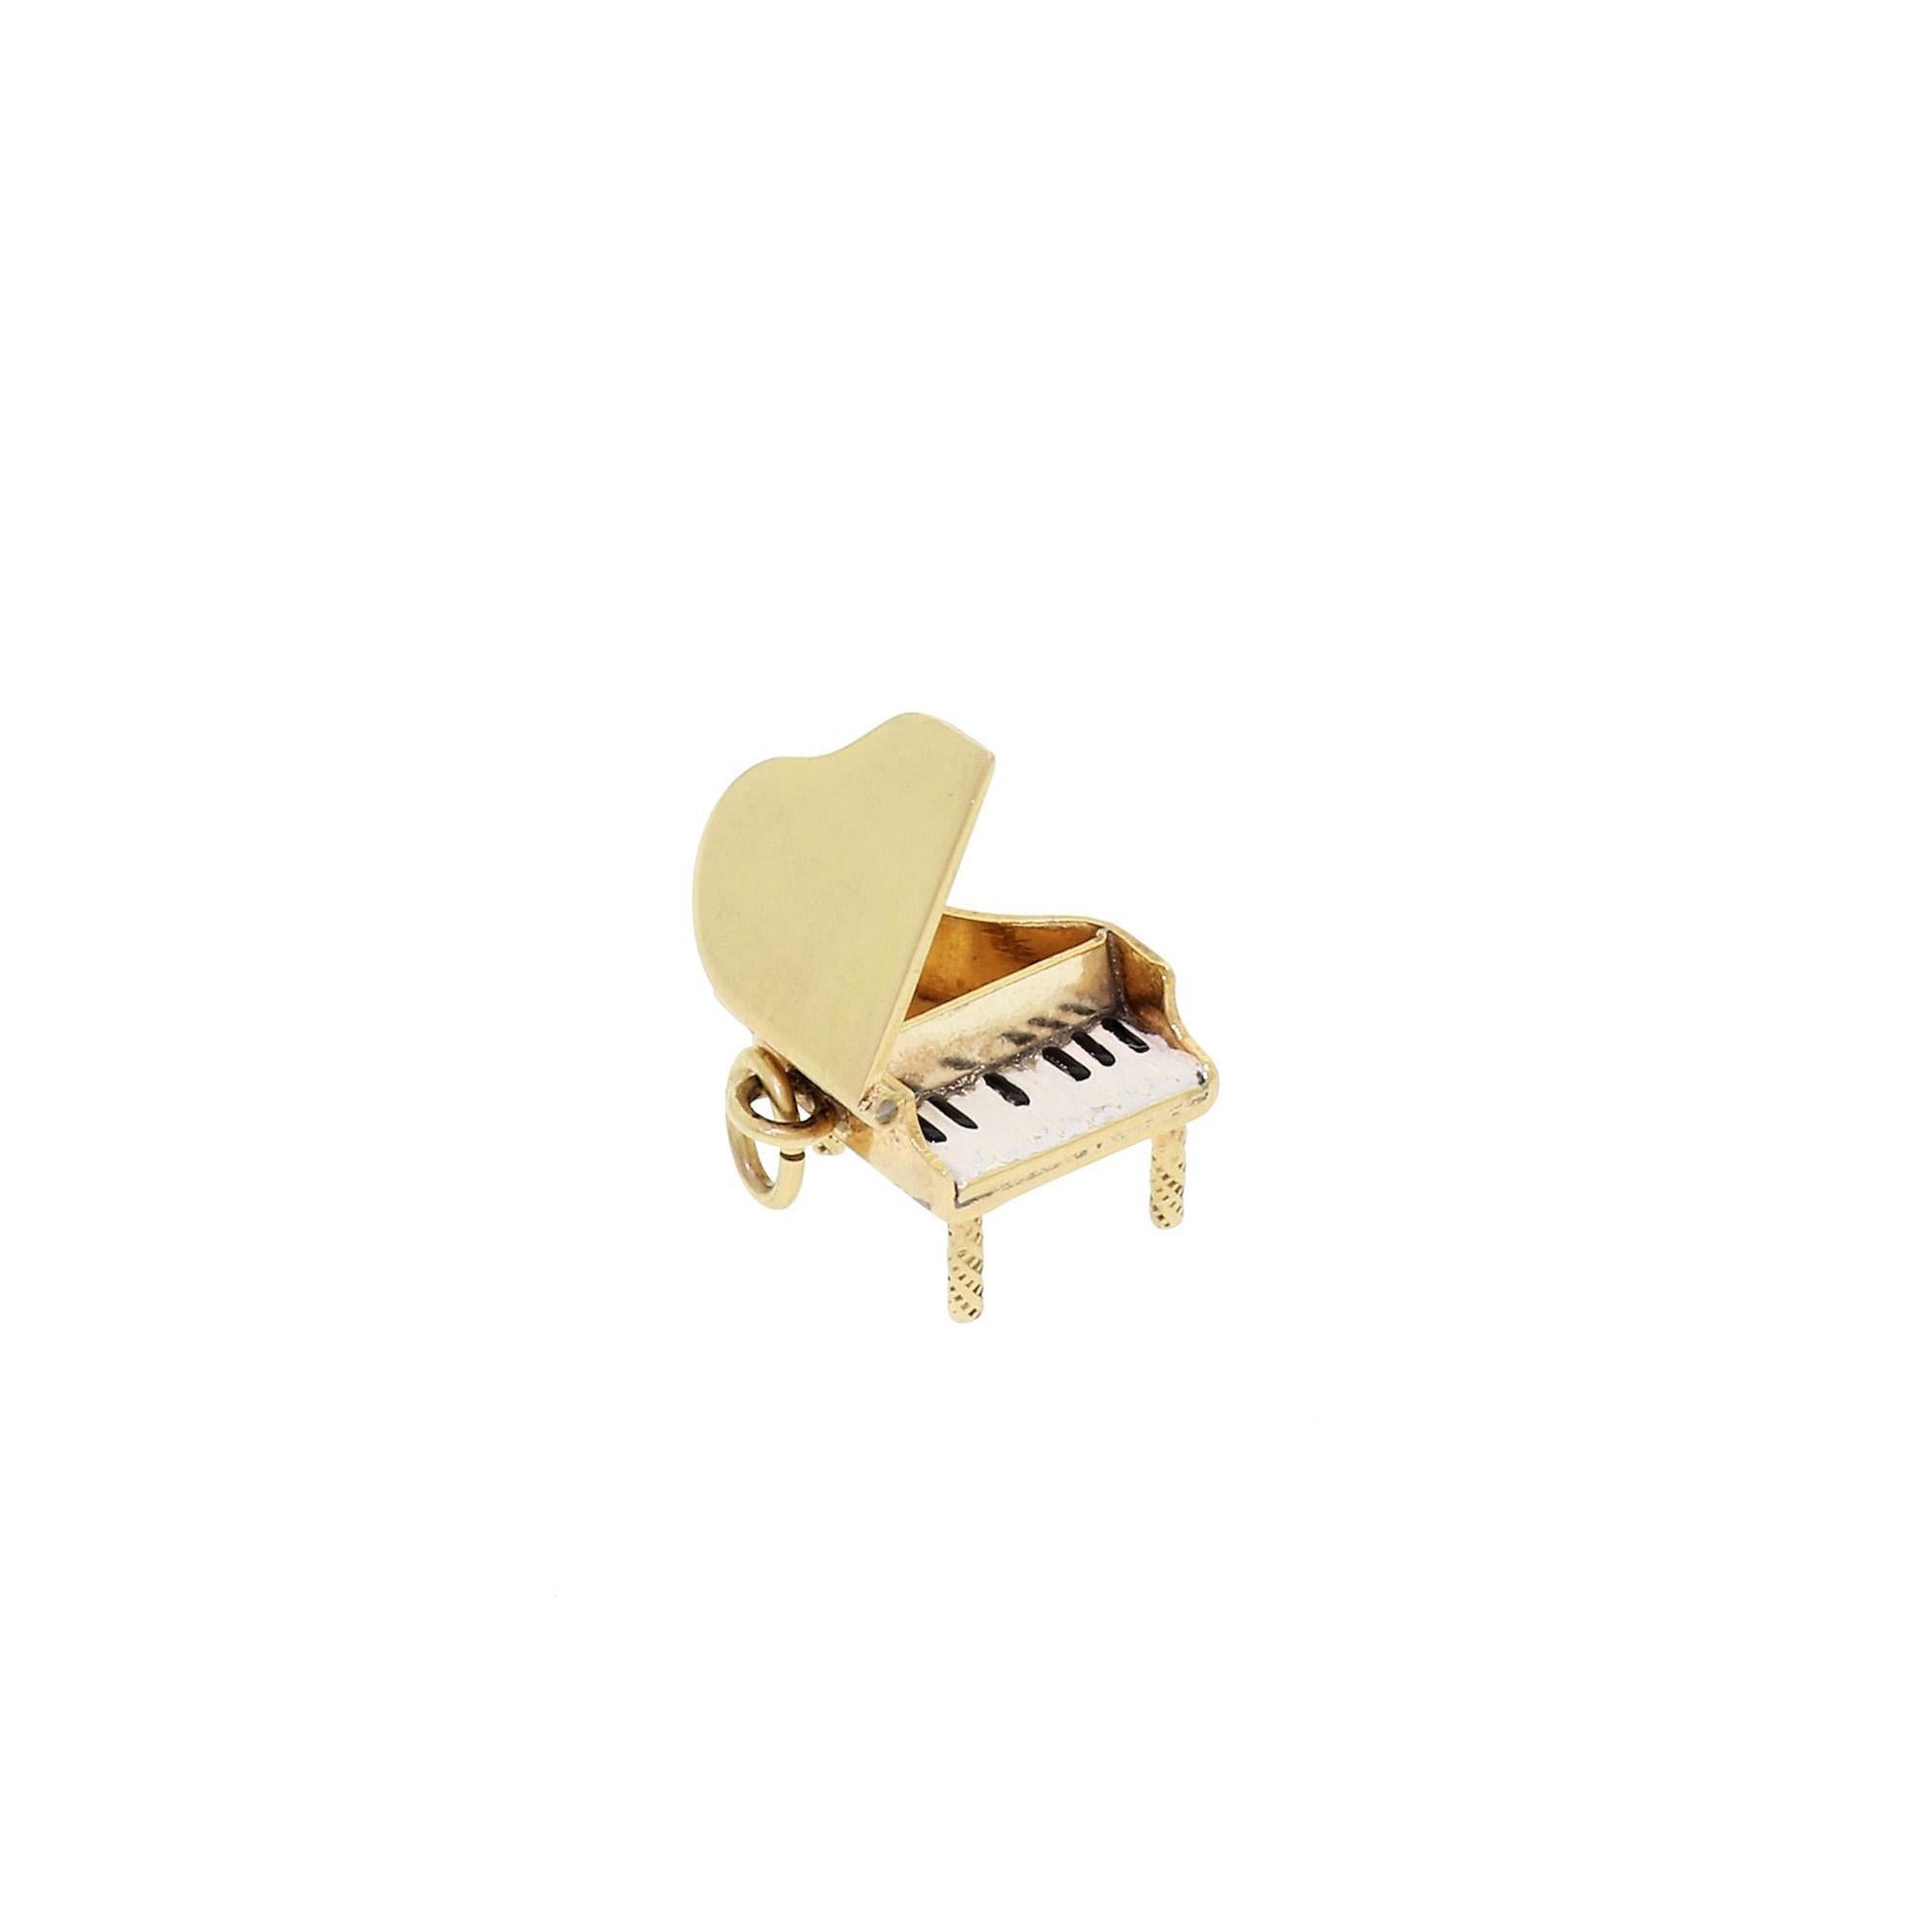 14K Yellow Gold & Enamel Baby Grand Piano Vintage Articulated Charm For Bracelet 2